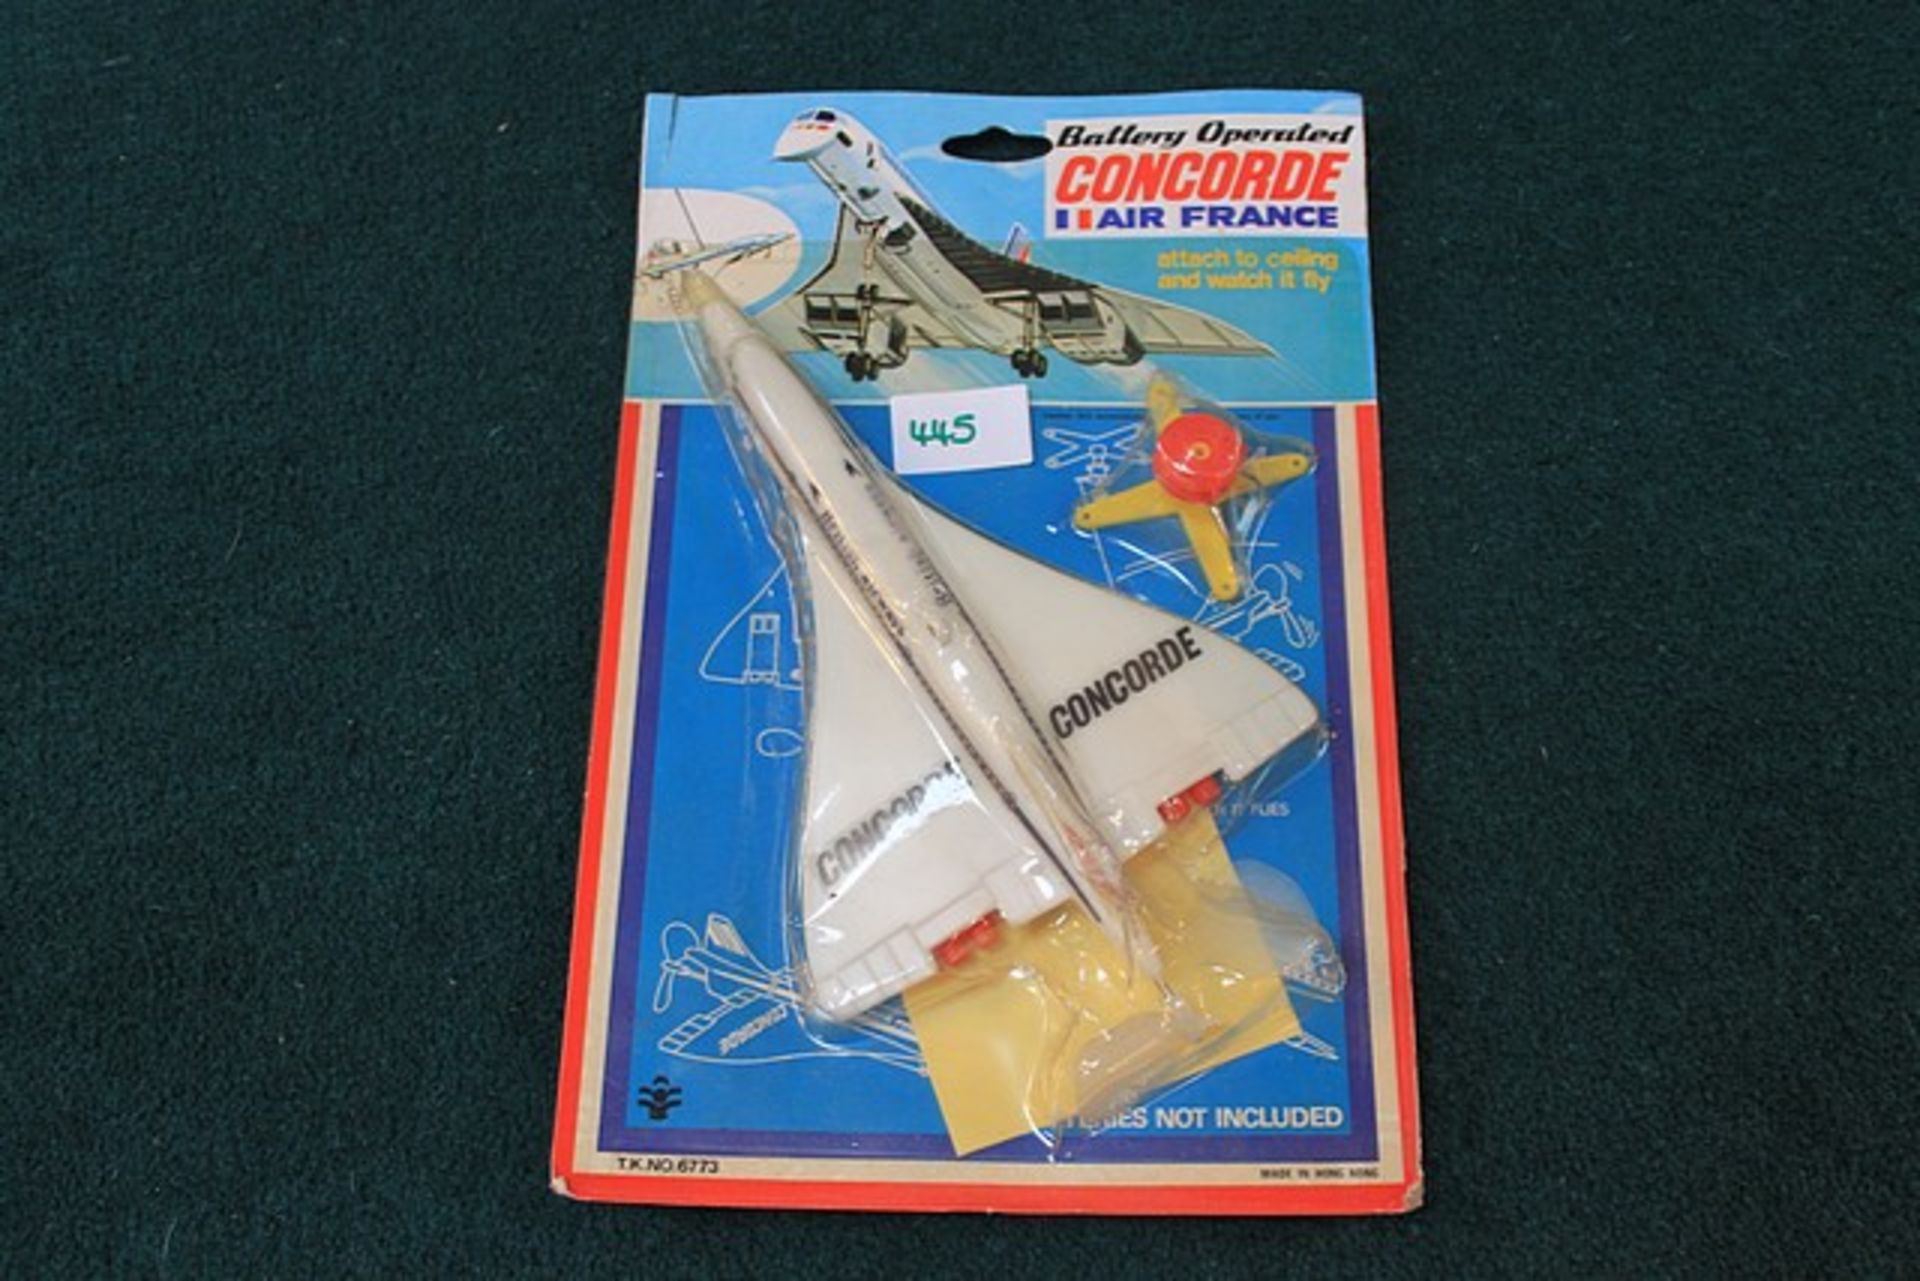 T K Hong Kong NO 6773 Battery Operated Concorde Air France In Original Packaging